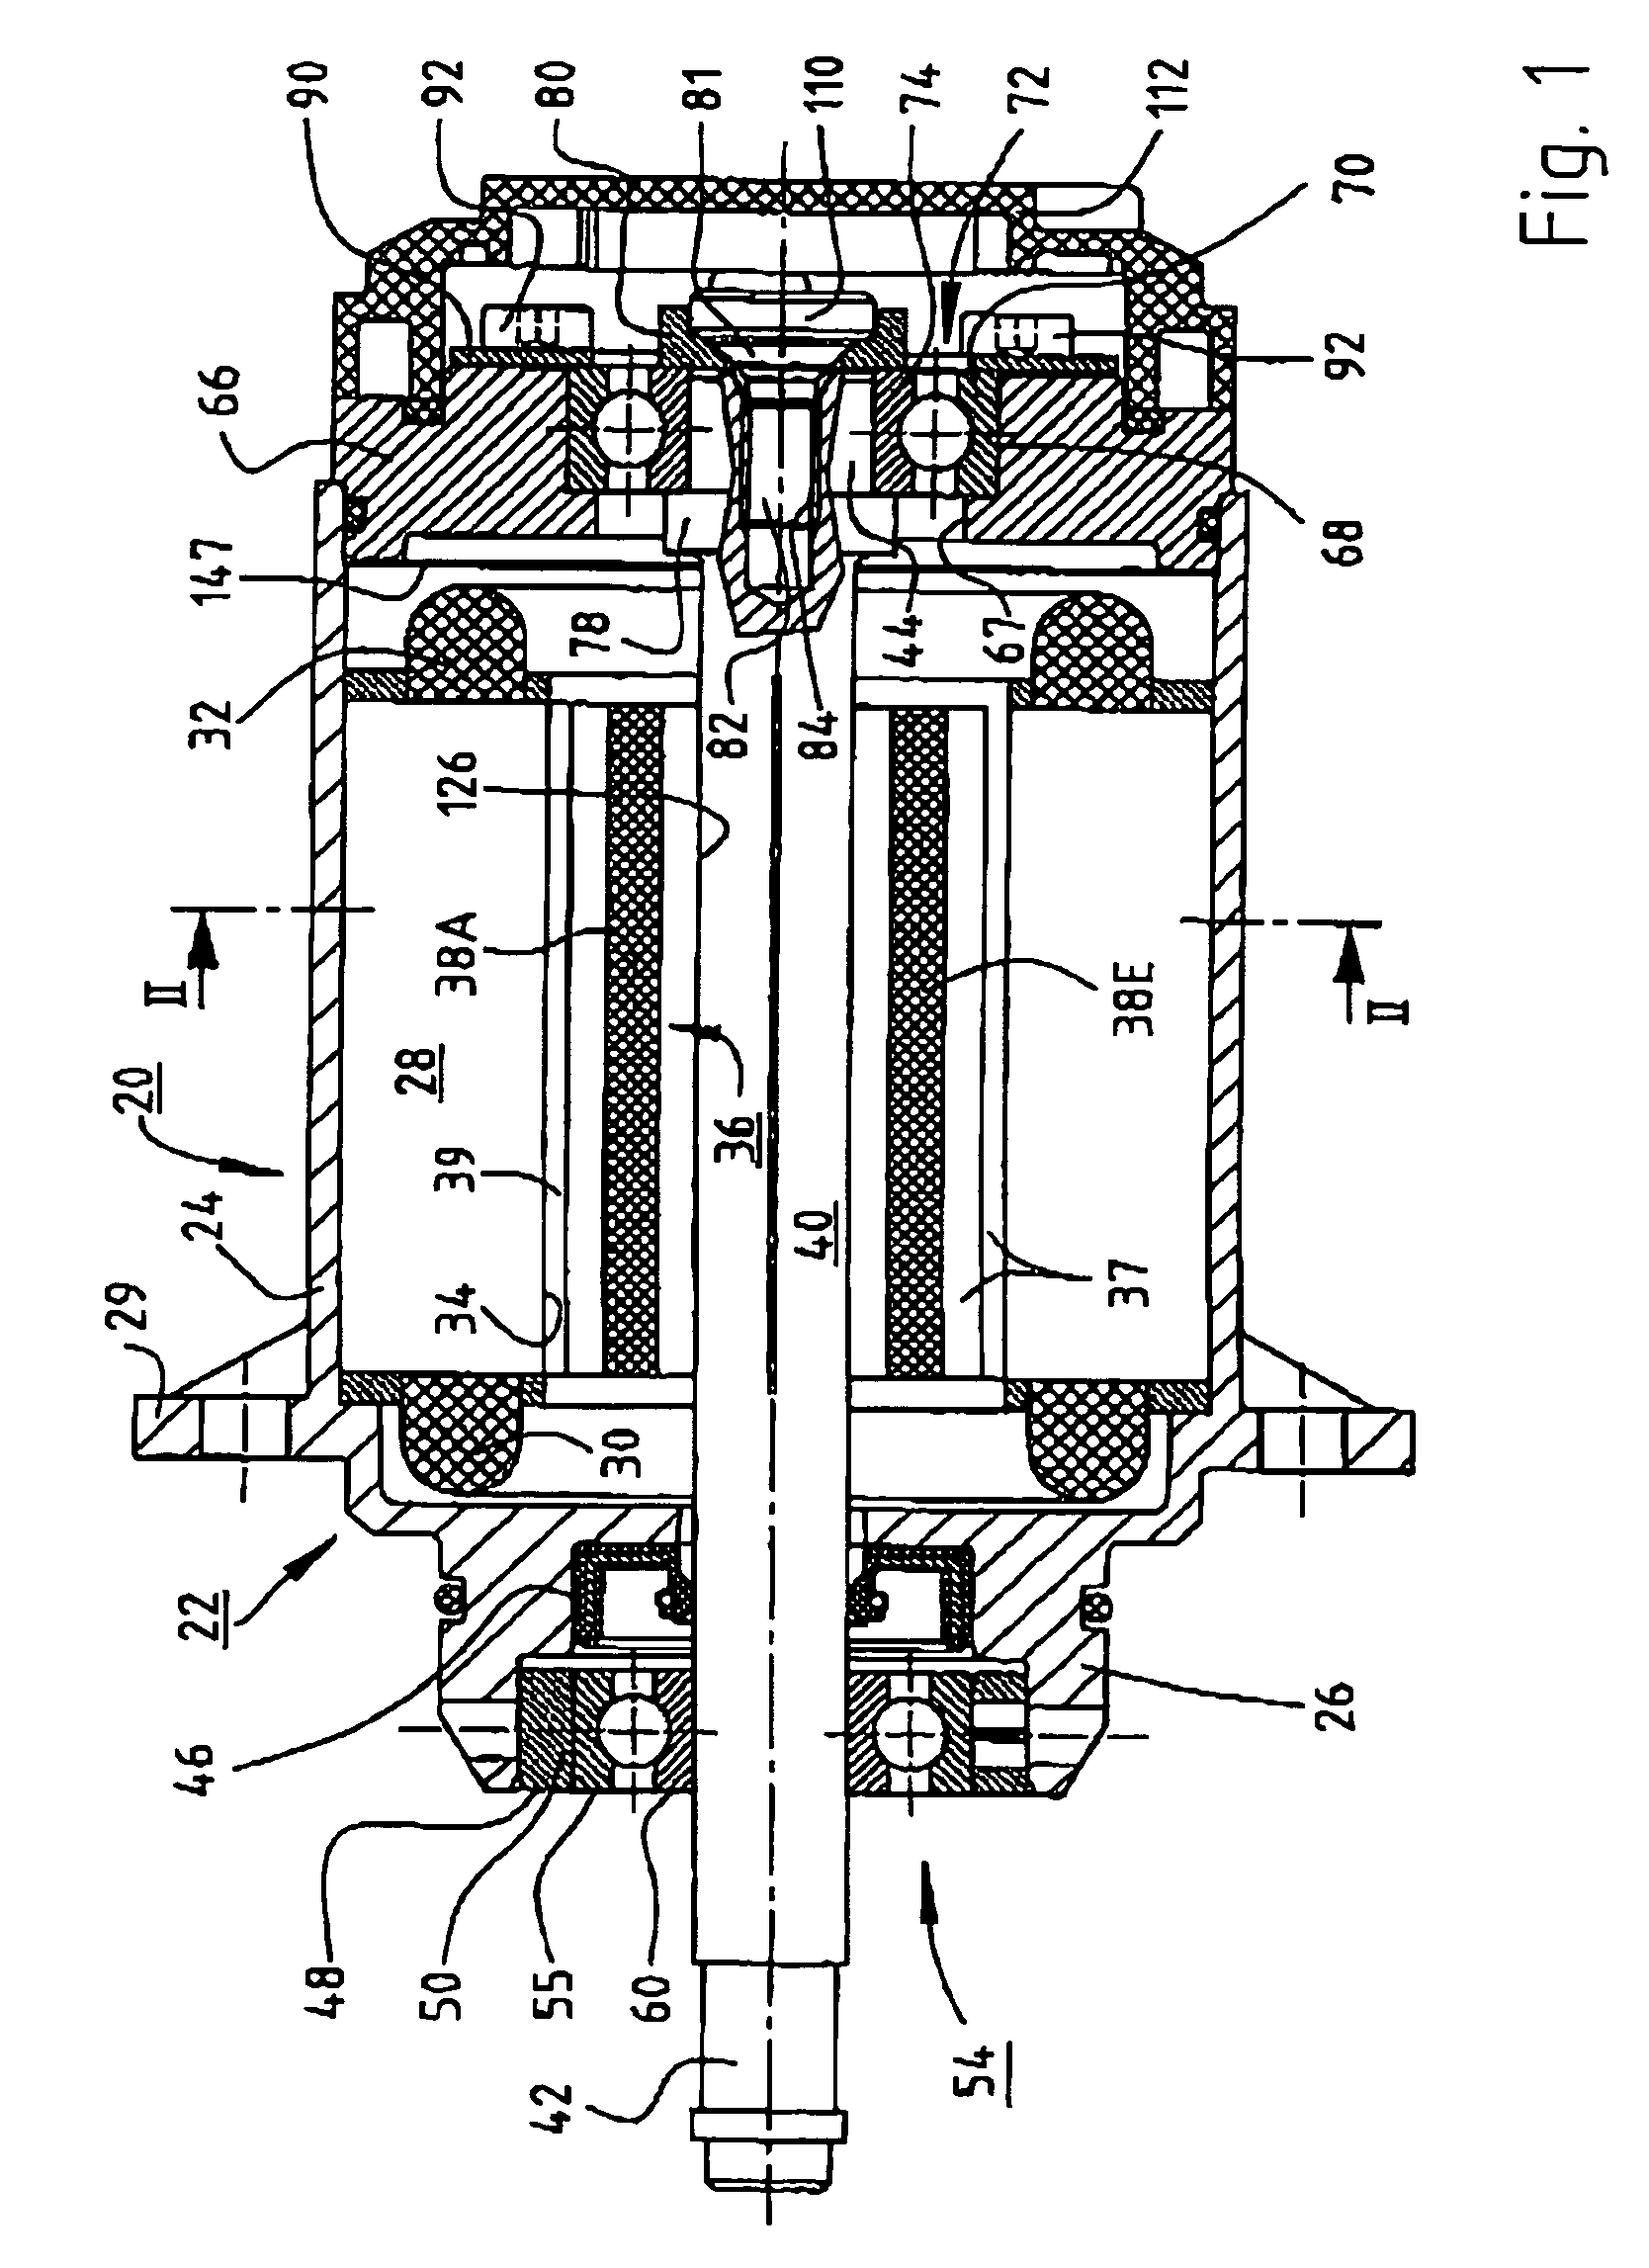 Electric motor with poles shaped to minimize cogging torque